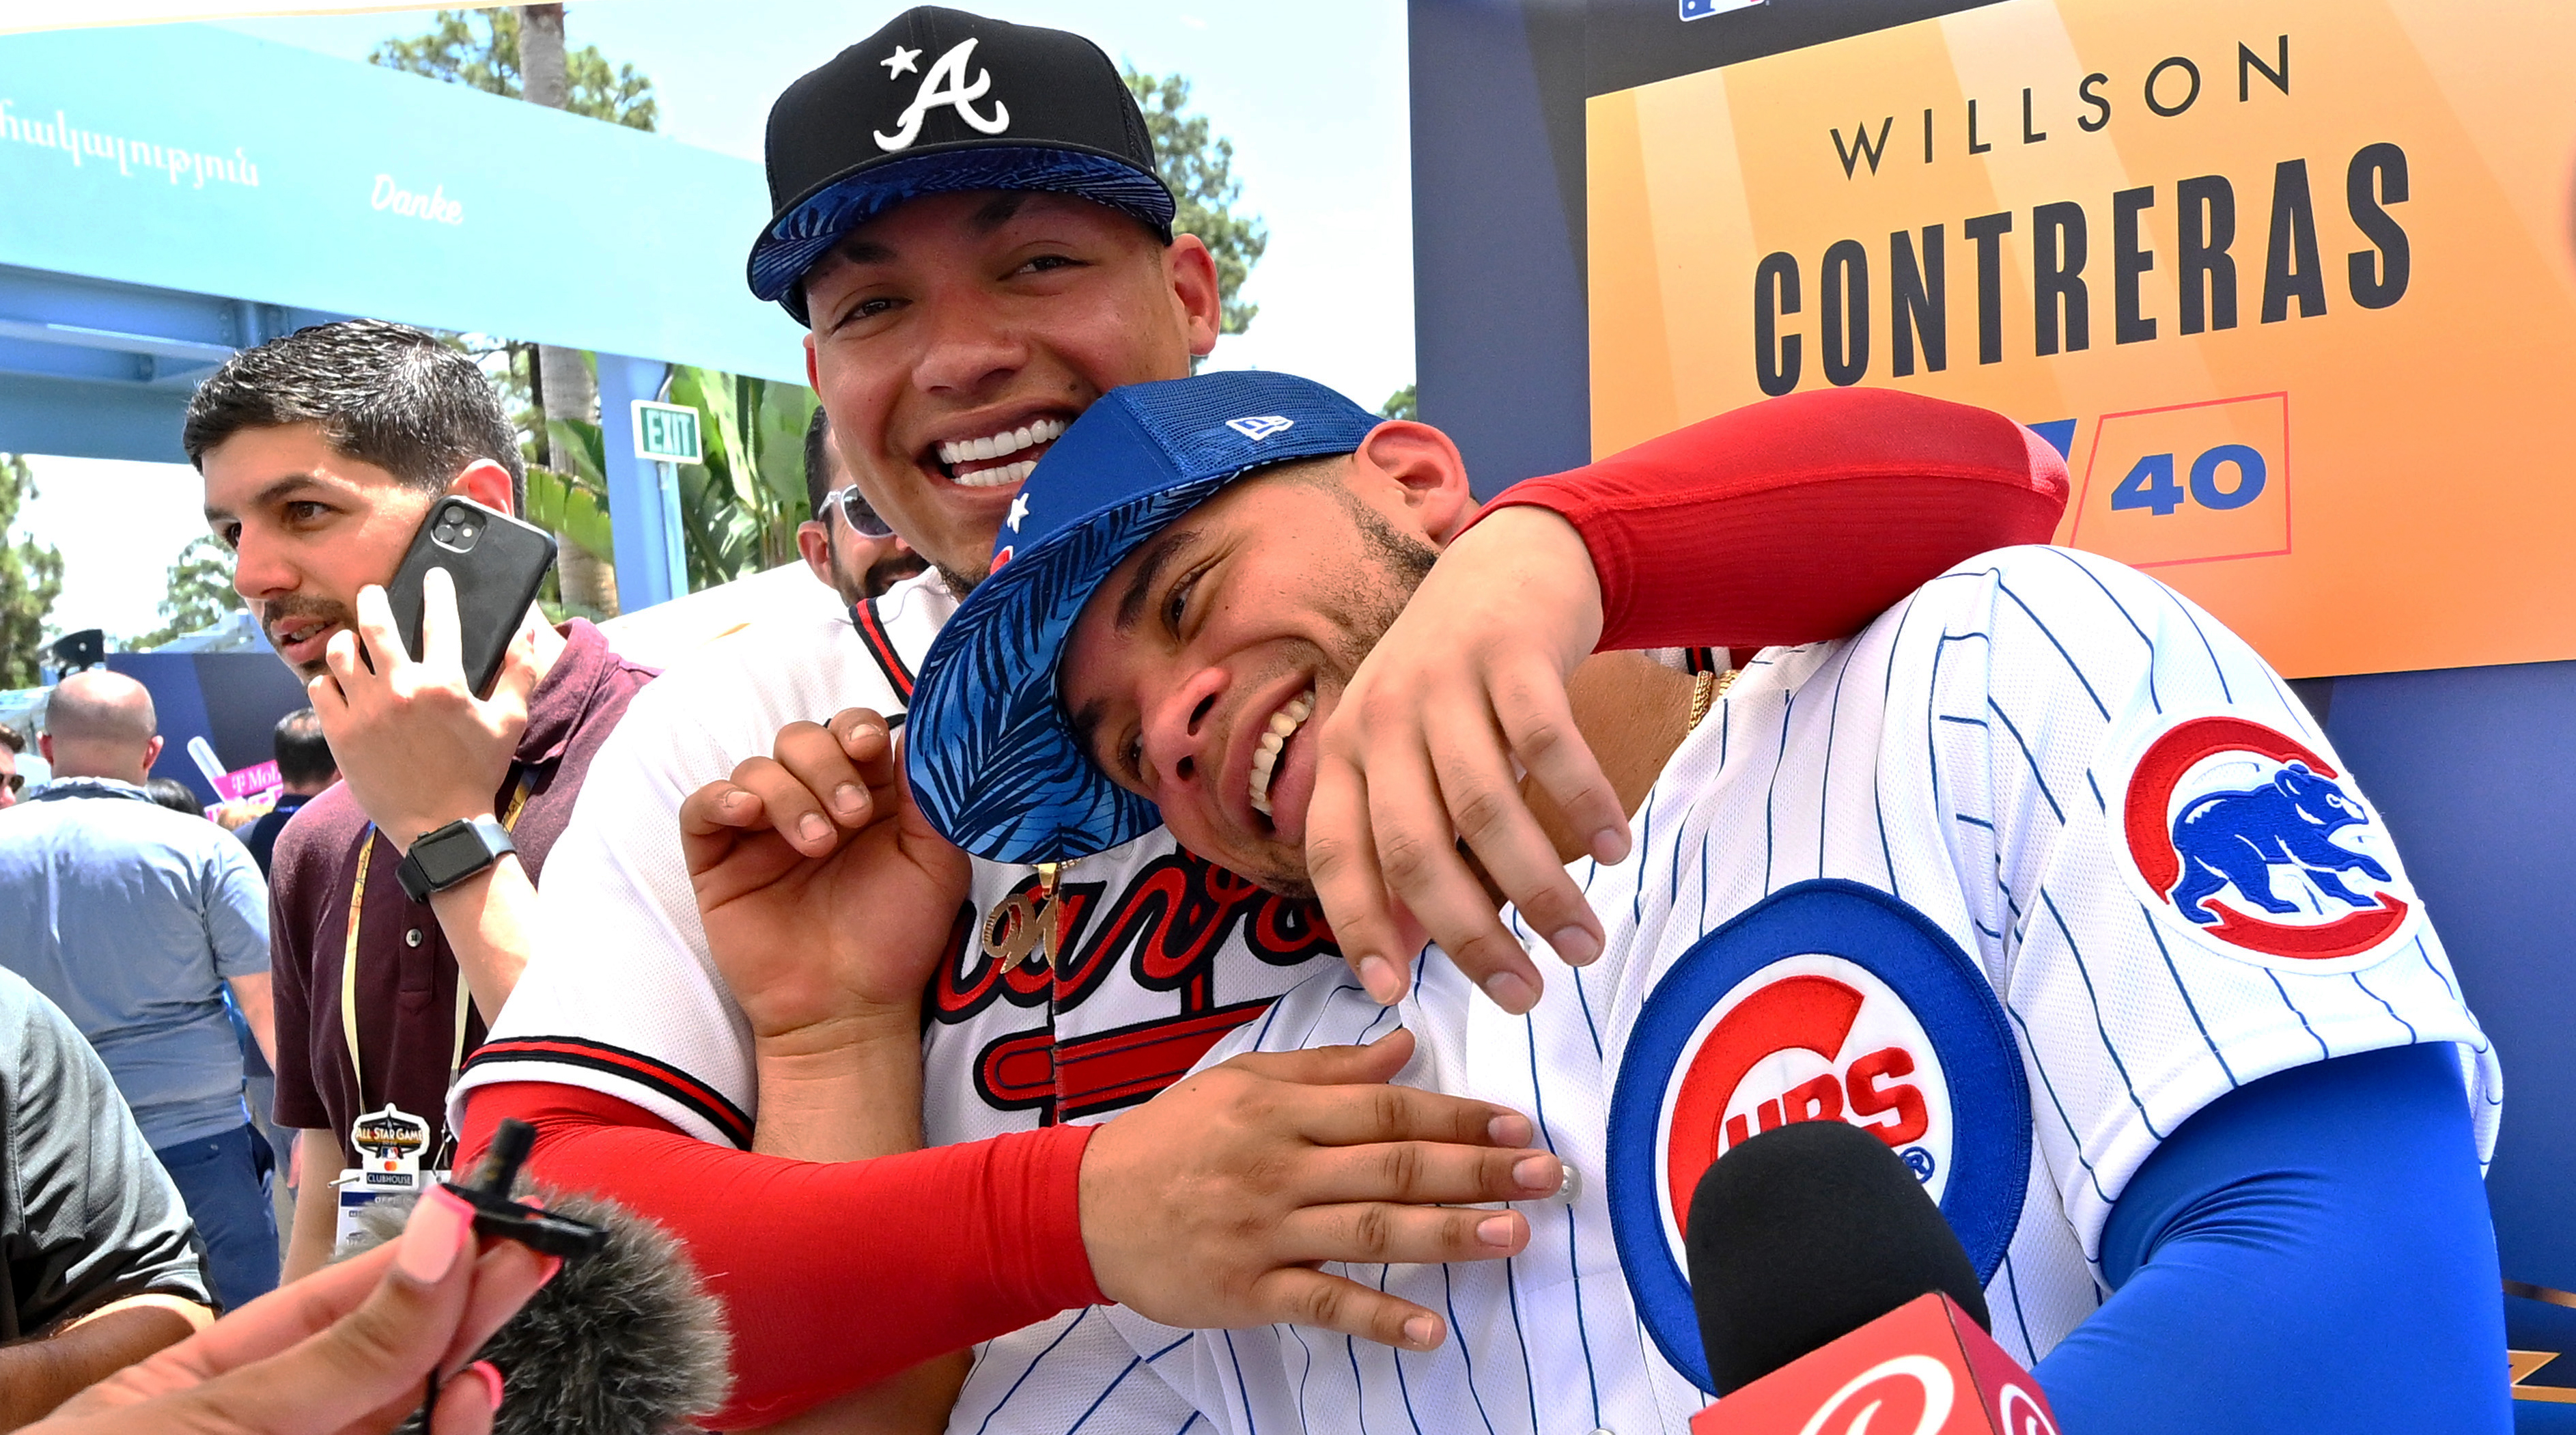 Instant Replay: Contreras Brothers Start All-Star Game Together